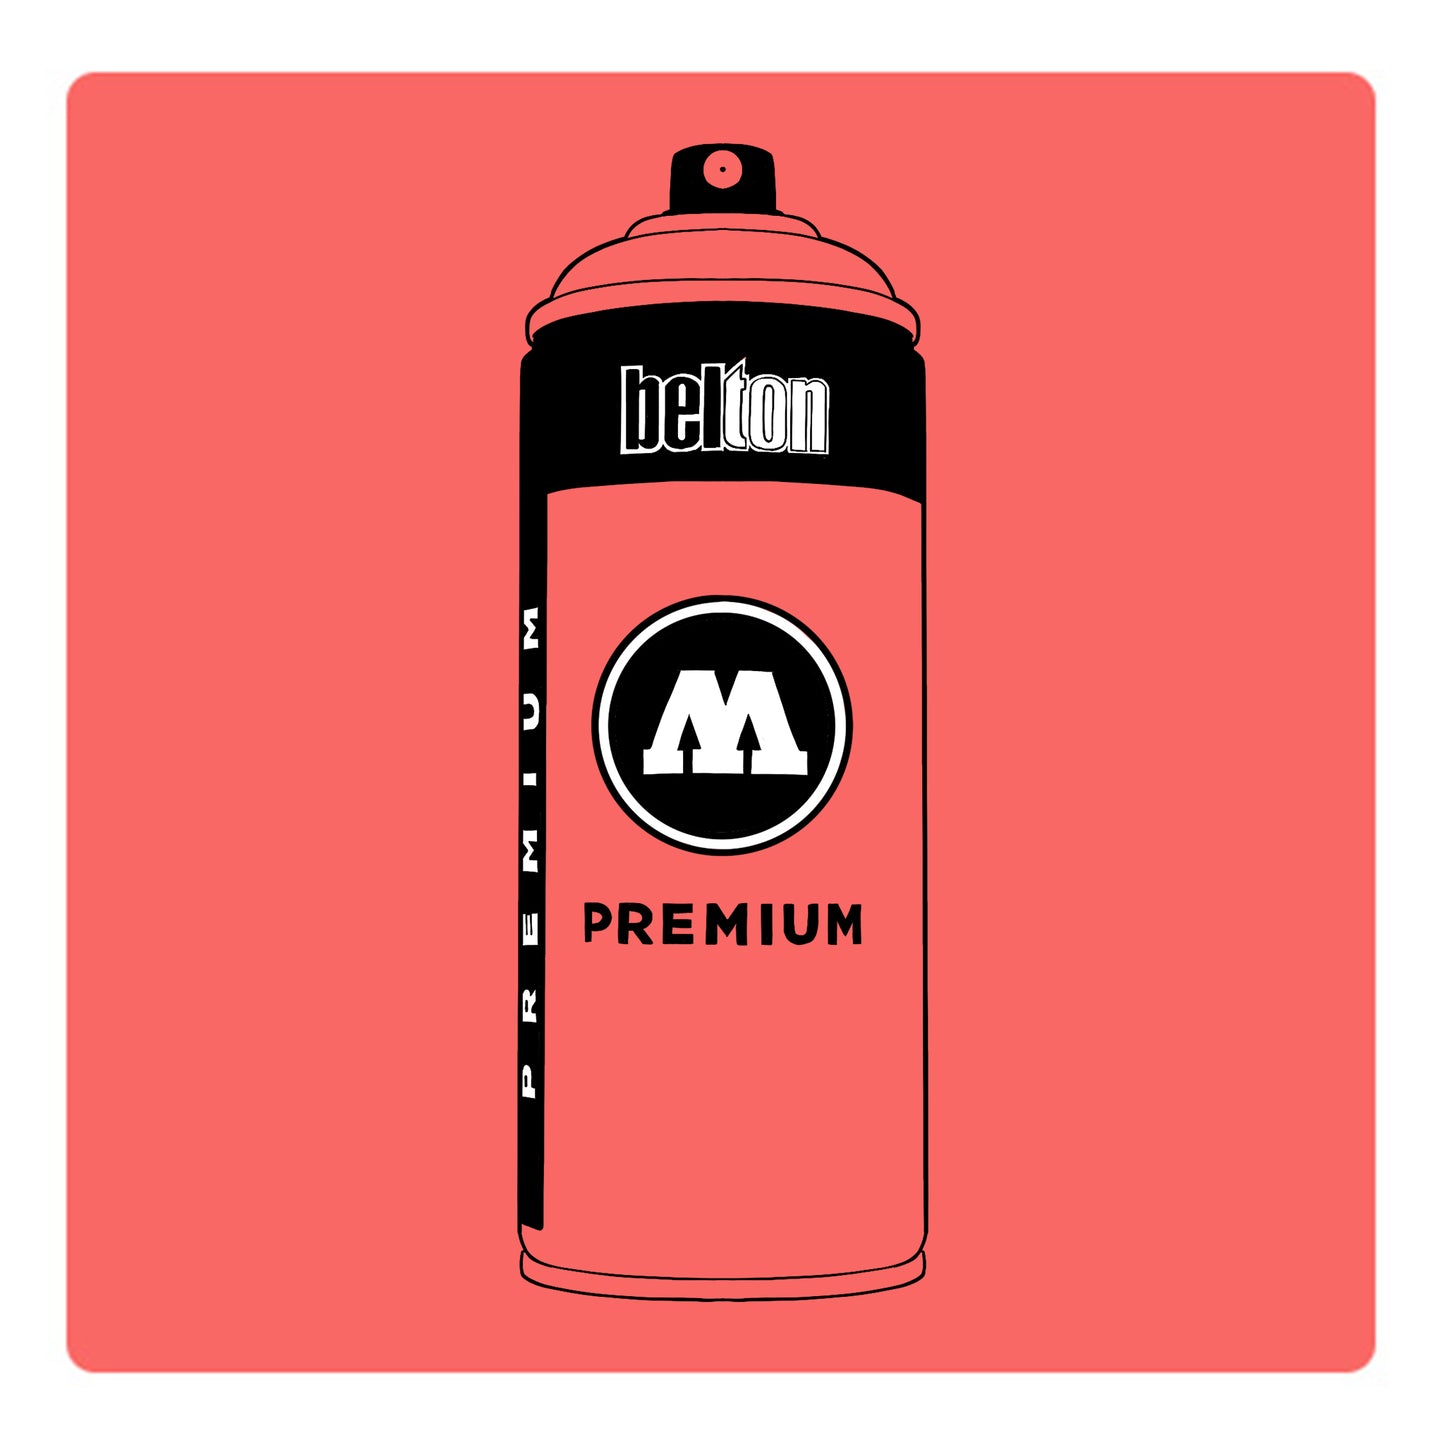 A black outline drawing of a salmon colored spray paint can with the words "belton","premium" and the letter"M" written on the face in black and white font. The background is a color swatch of the same salmon color with a white border.